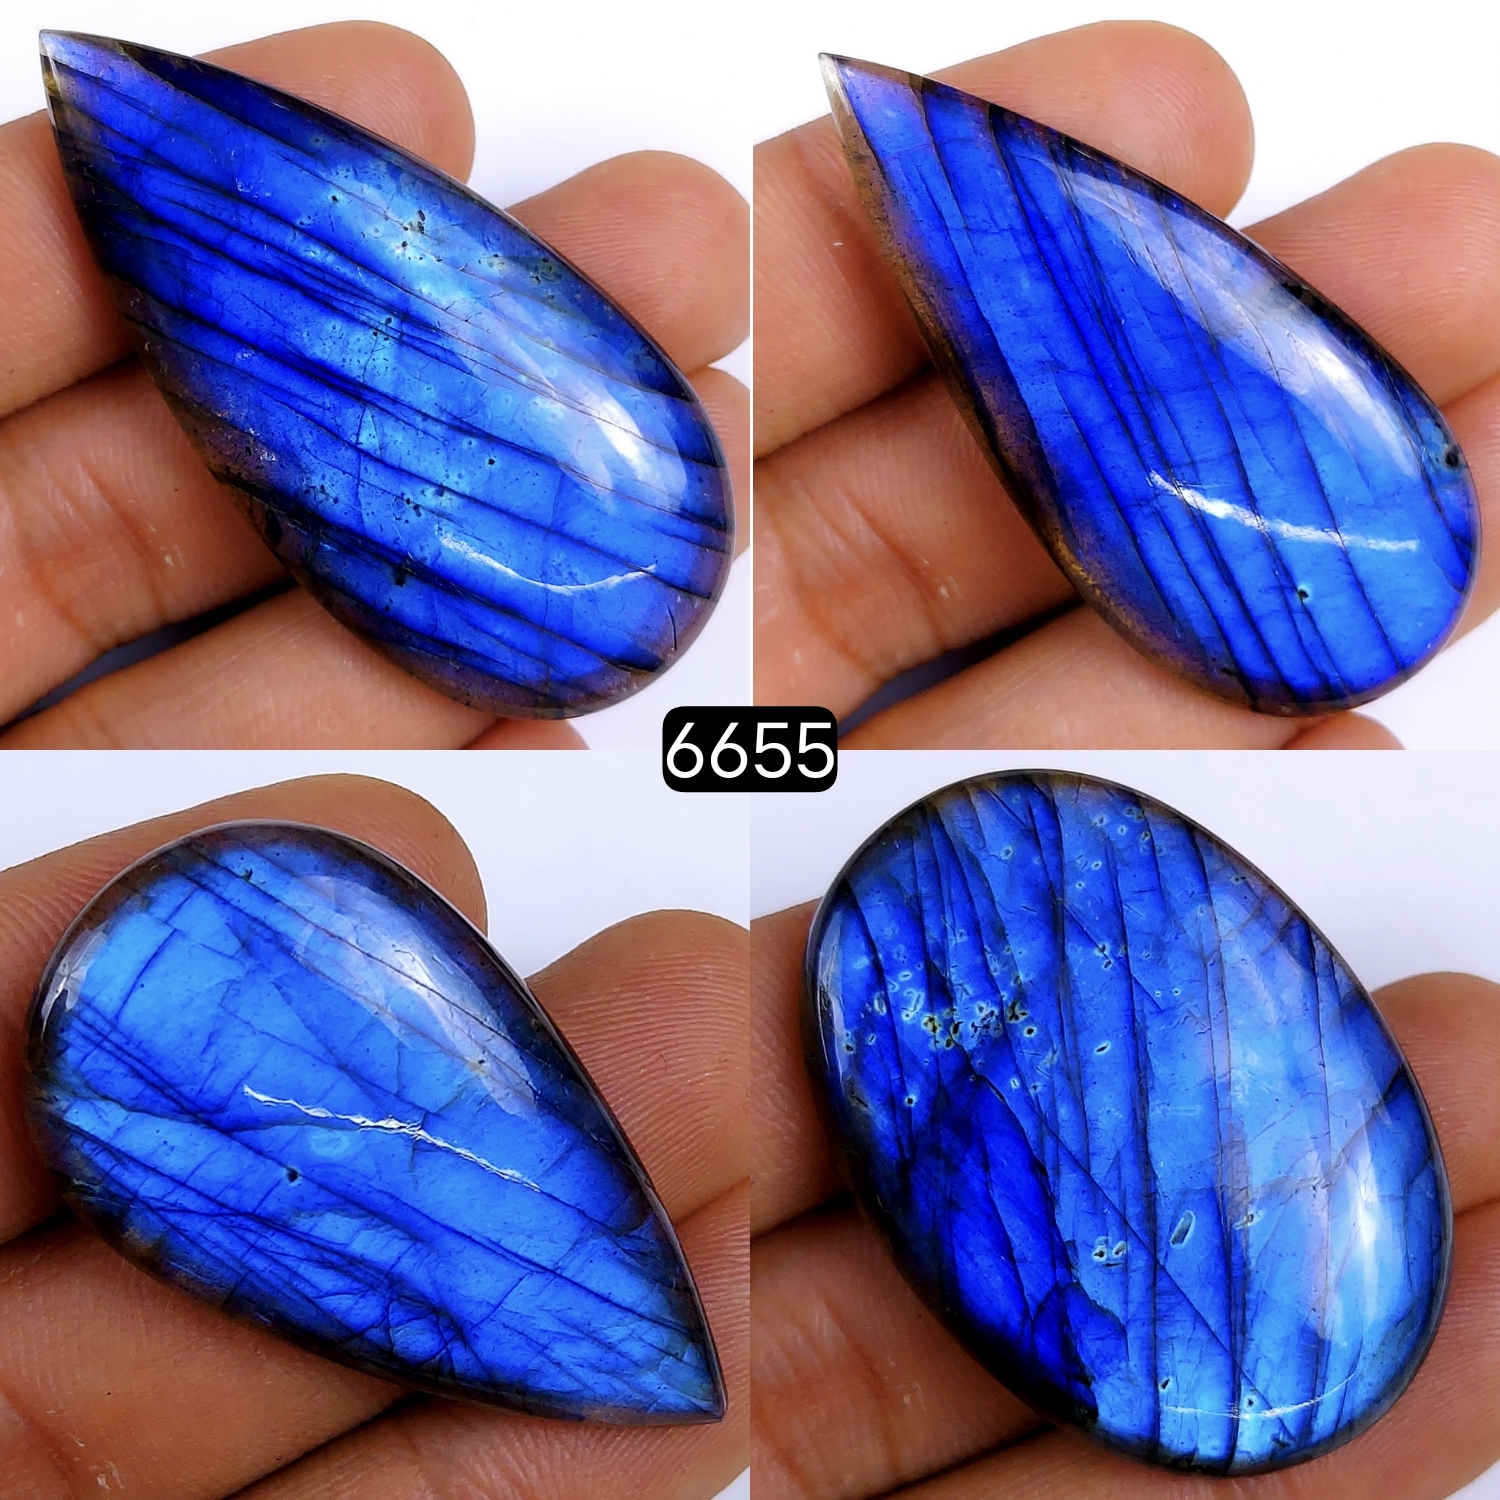 4Pcs Lot 256Cts Labradorite Cabochon Multifire Healing Crystal For Jewelry Supplies, Labradorite Necklace Handmade Wire Wrapped Gemstone Pendant 50x30 35x25mm#6655